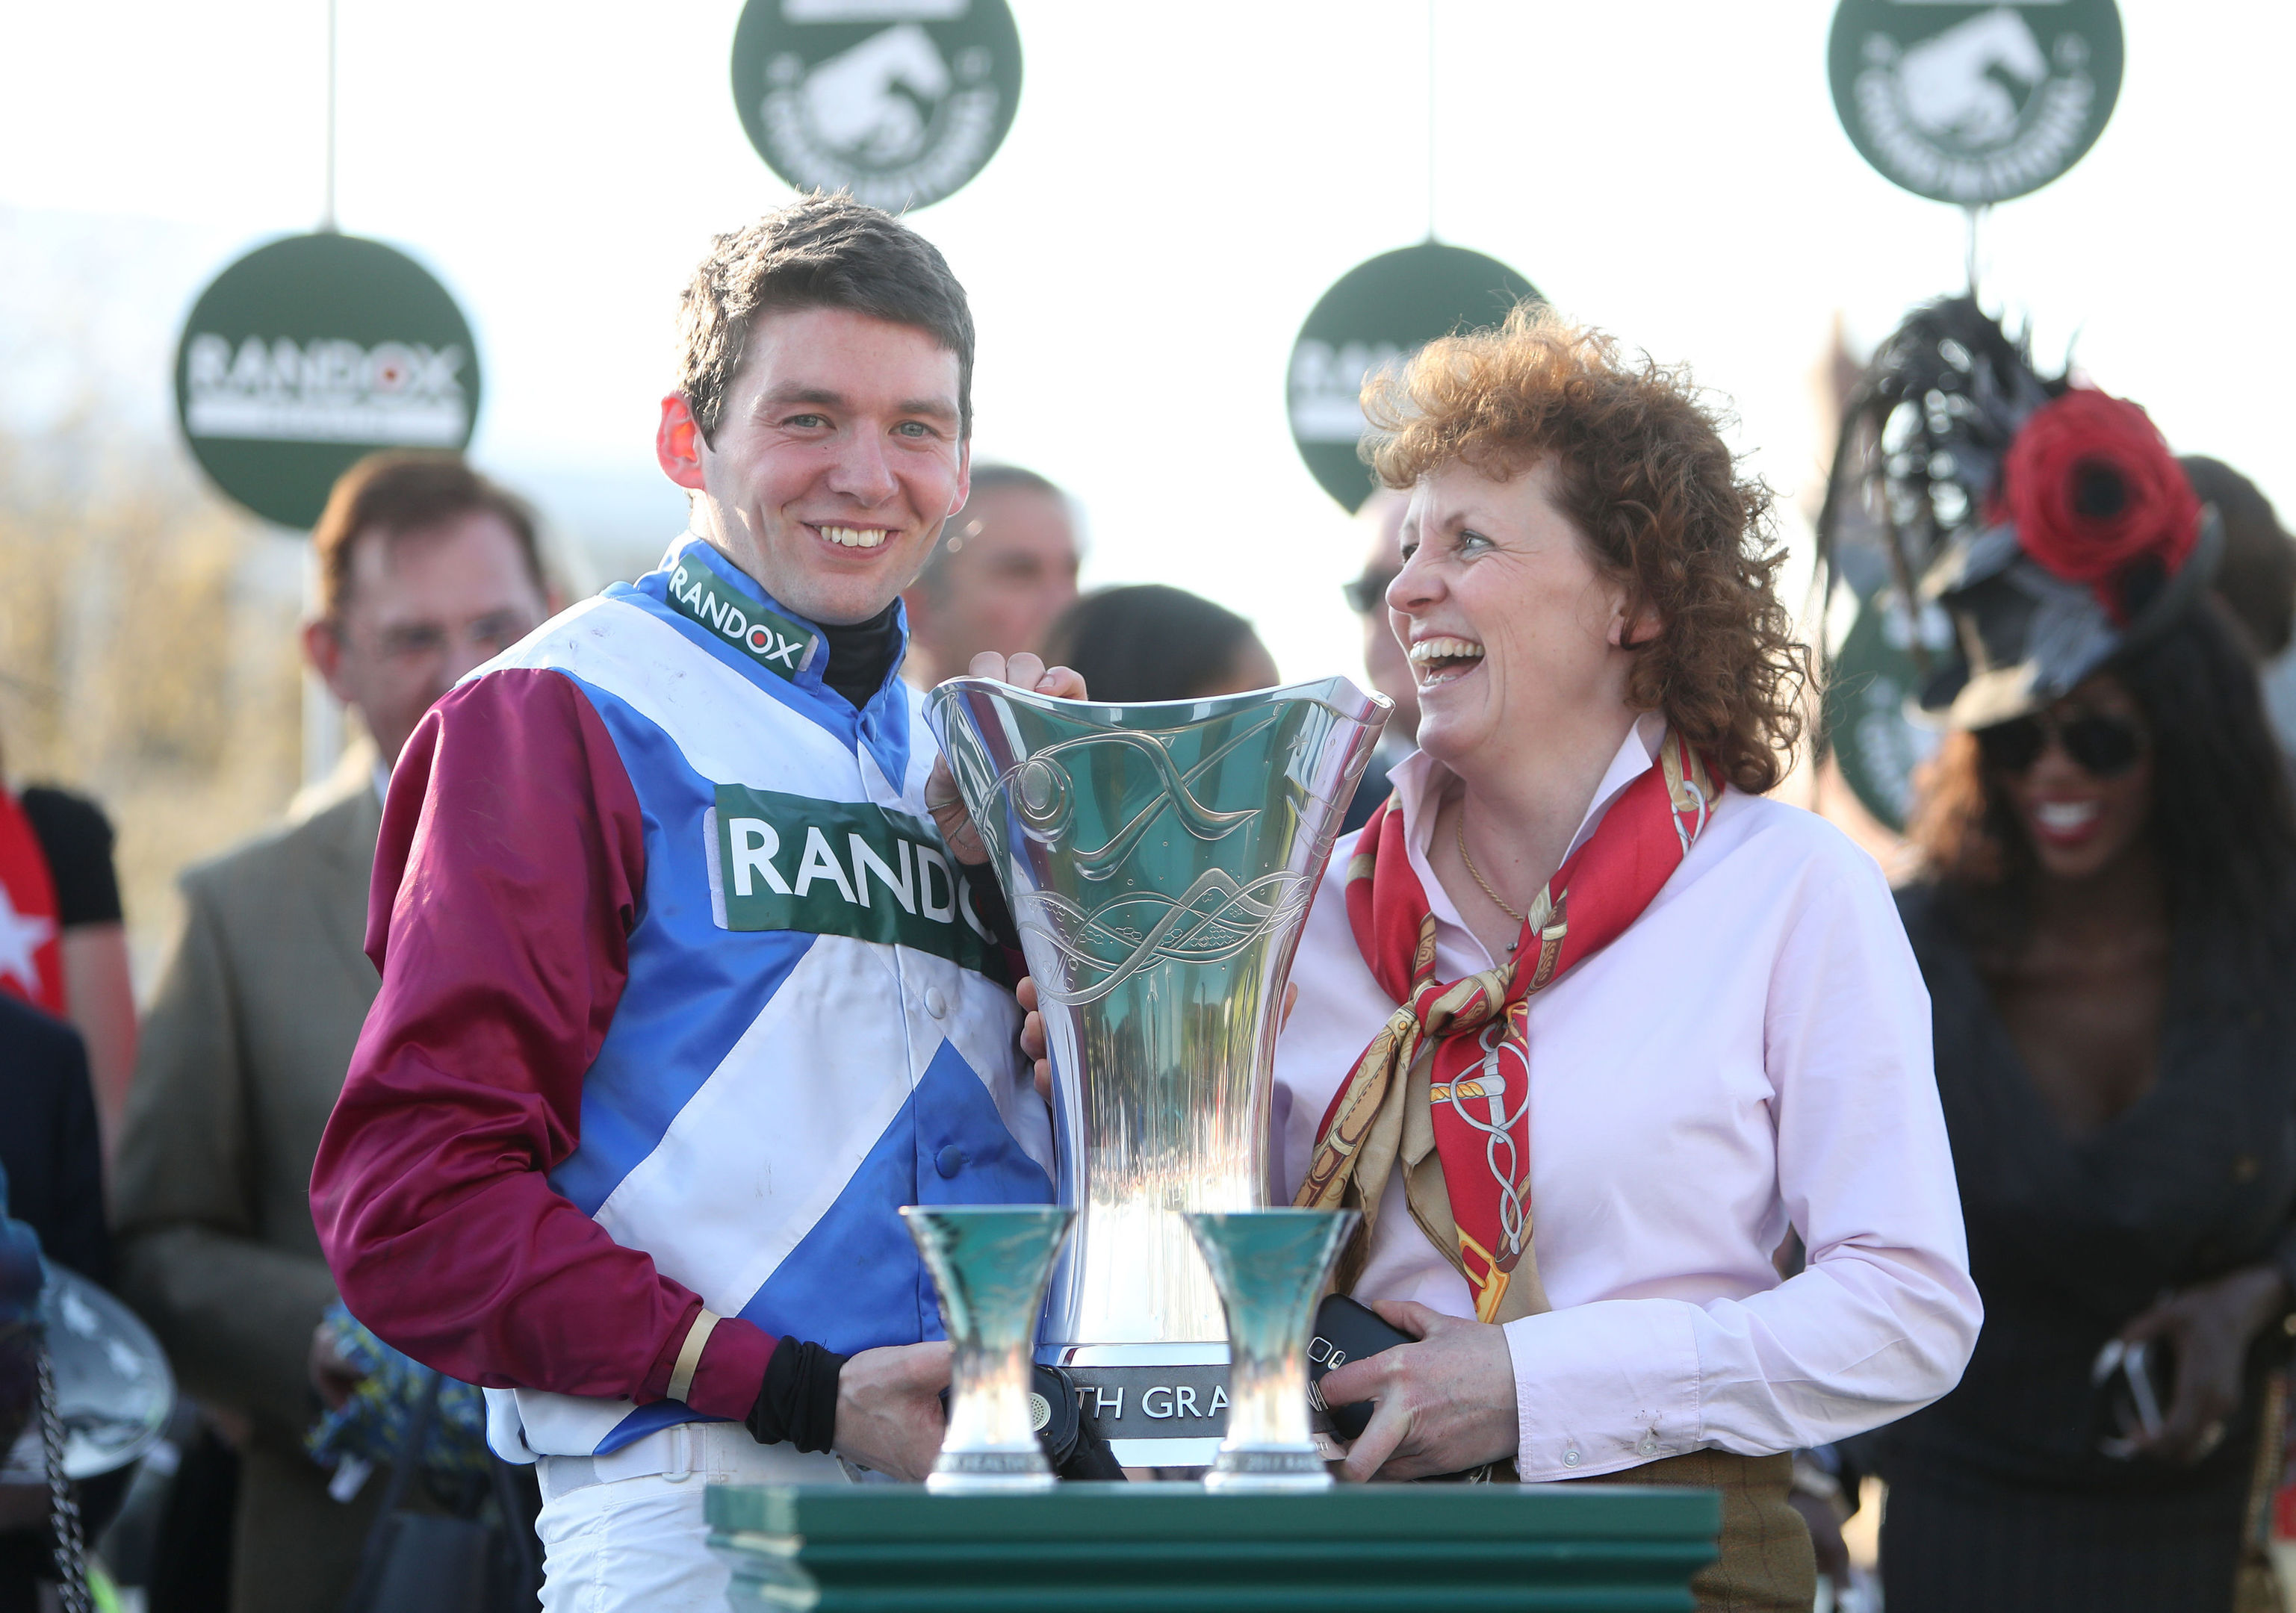 Jockey Derek Fox and trainer Lucinda Russell celebrate with the trophy after winning the Randox Health Grand National on One For Arthur.